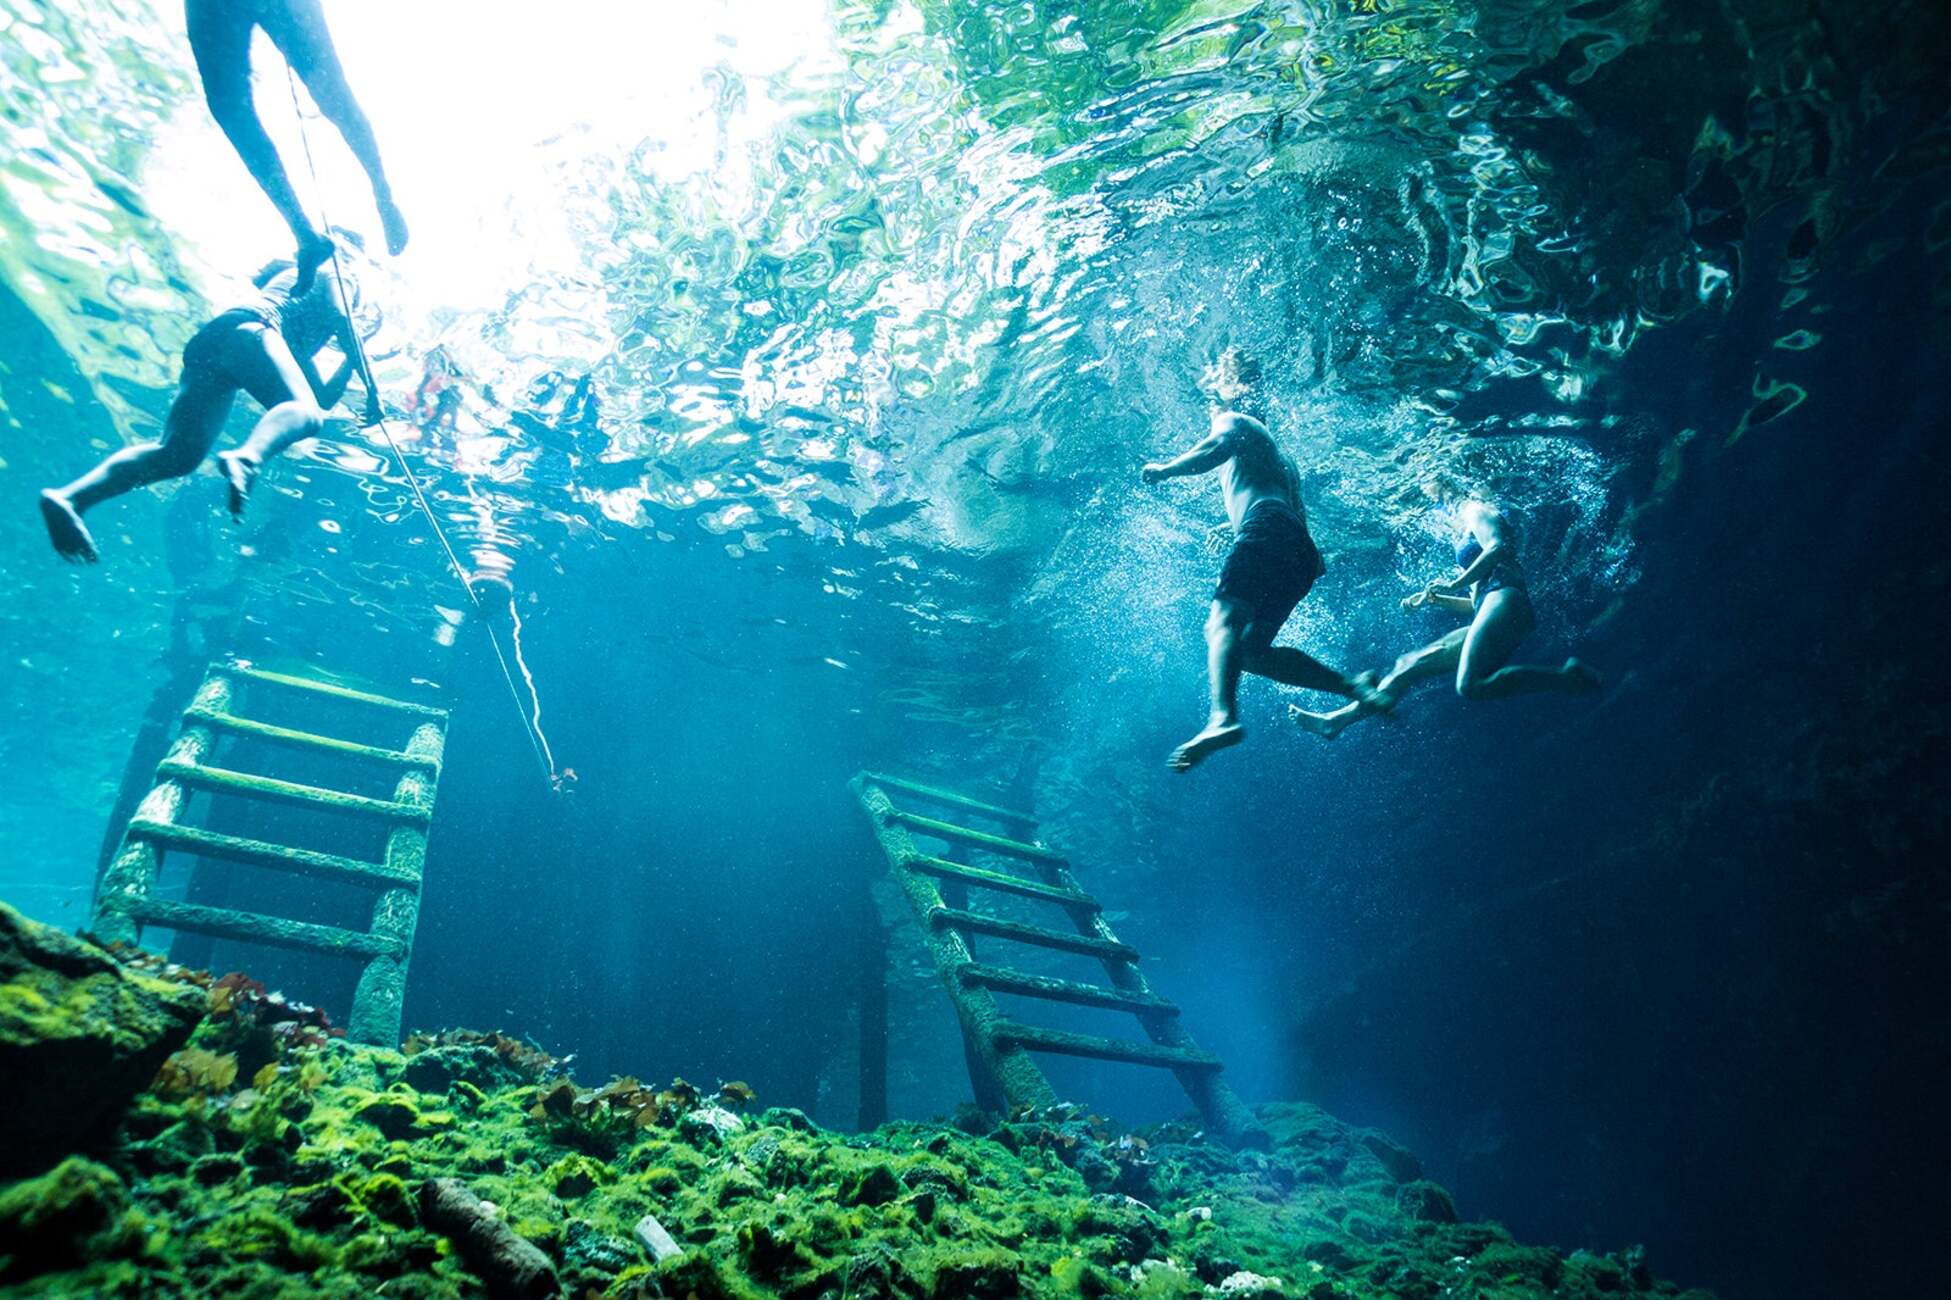 Dive into the Mysteries of the Mayan World: Tulum, Labnaha Cenotes, and Cobá Adventure! 🏝️🚀 Explore Tulum's archaeological site by the Caribbean Sea, swim in the enchanting cenotes of Labnaha, and uncover the treasures of Cobá. Join us on this thrilling expedition through the wonders of the Mayan world! 🏞️🚴‍♂️🏜️ #MayanWorldAdventure #CenoteExploration #CobaExpedition